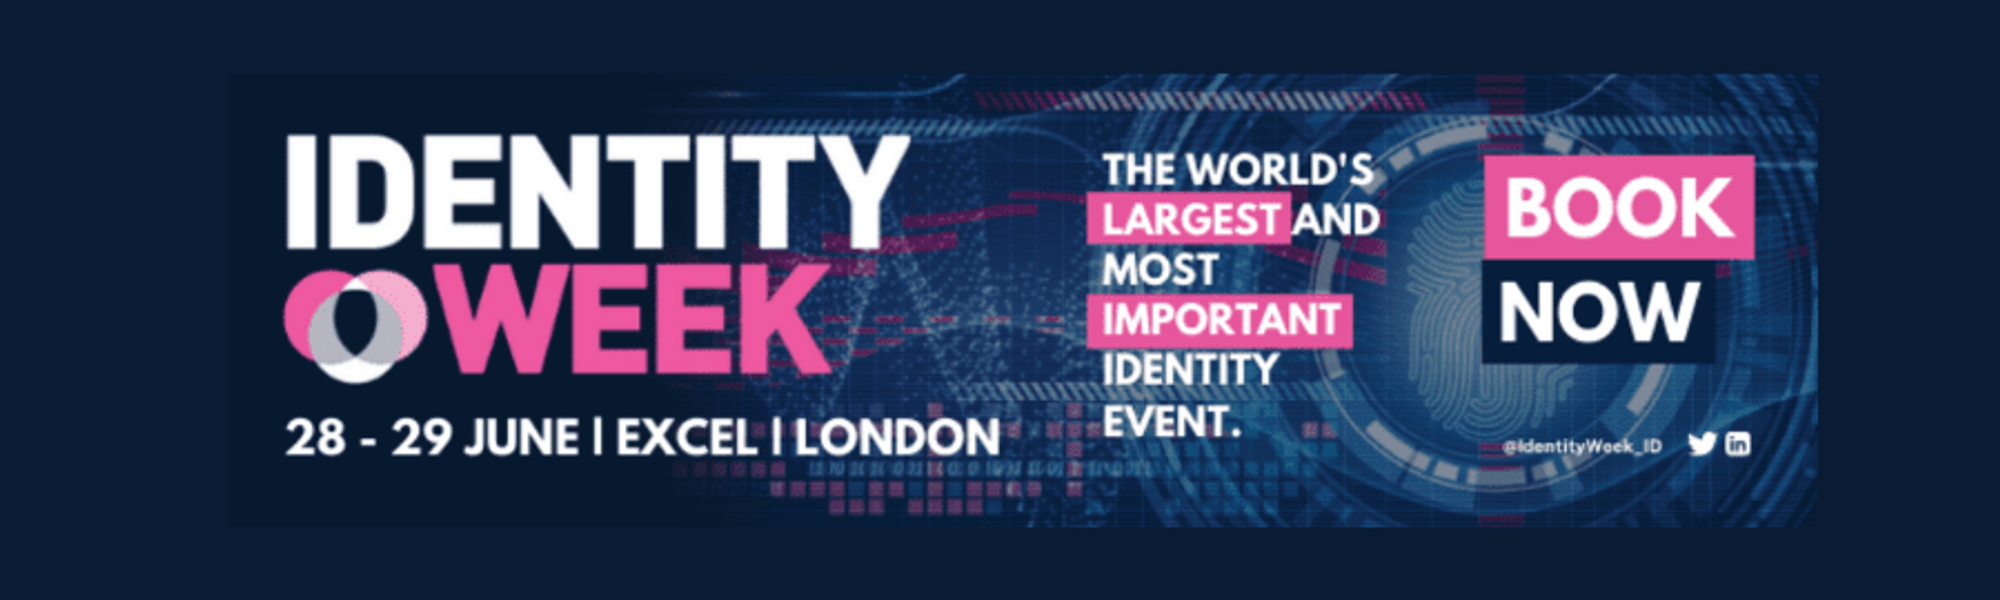 Identity Week The world's largest and most important identity event